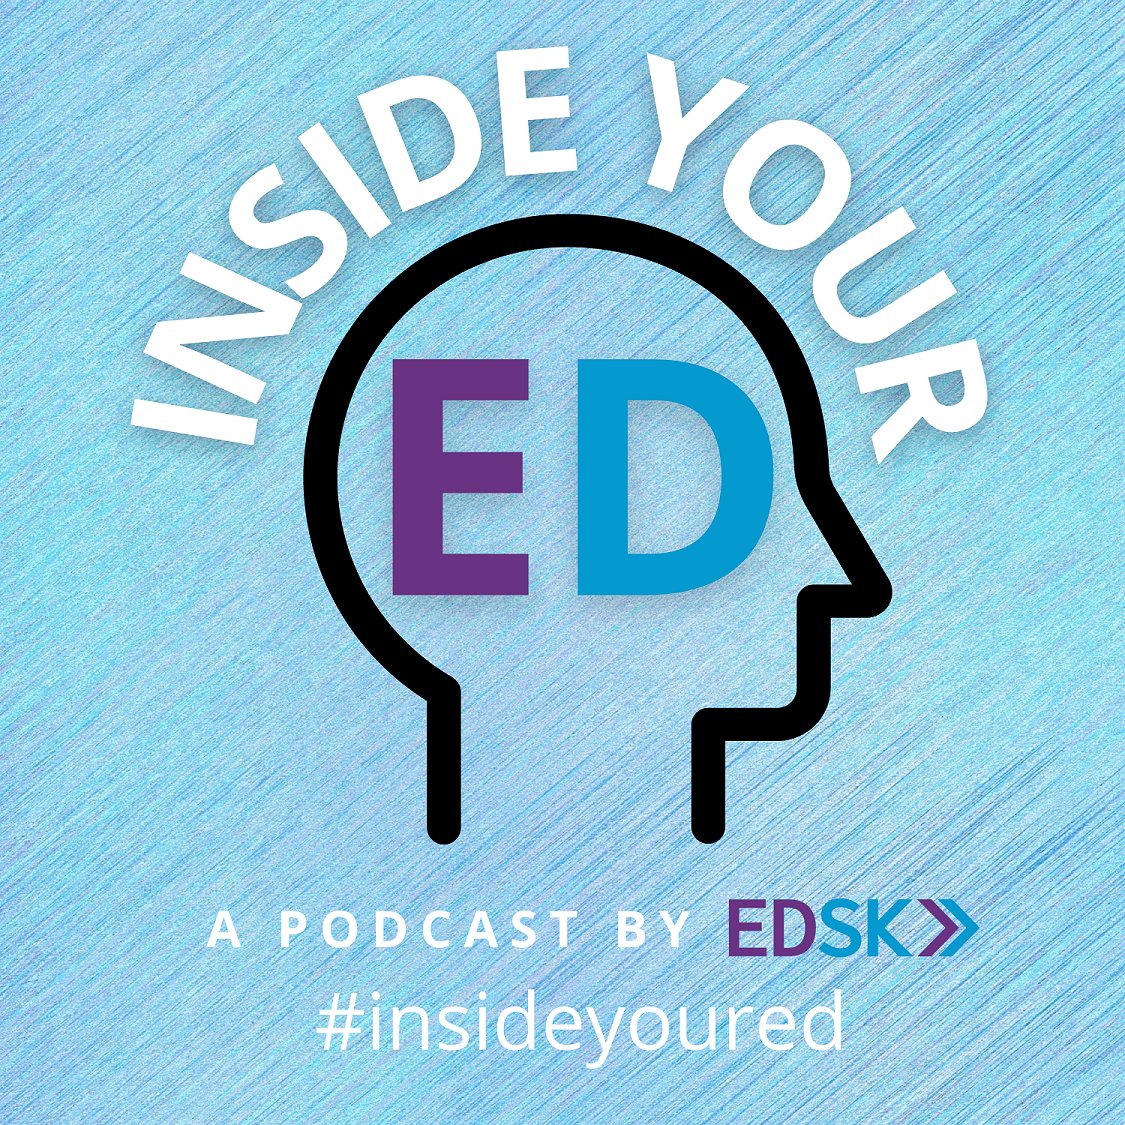 Is now a good time to mention that the latest episode of our #insideyoured podcast, featuring @Niamhms23 and @Ed_Dorrell, discussed the prospect of yet more teacher strikes?....

buzzsprout.com/1874905/124862…